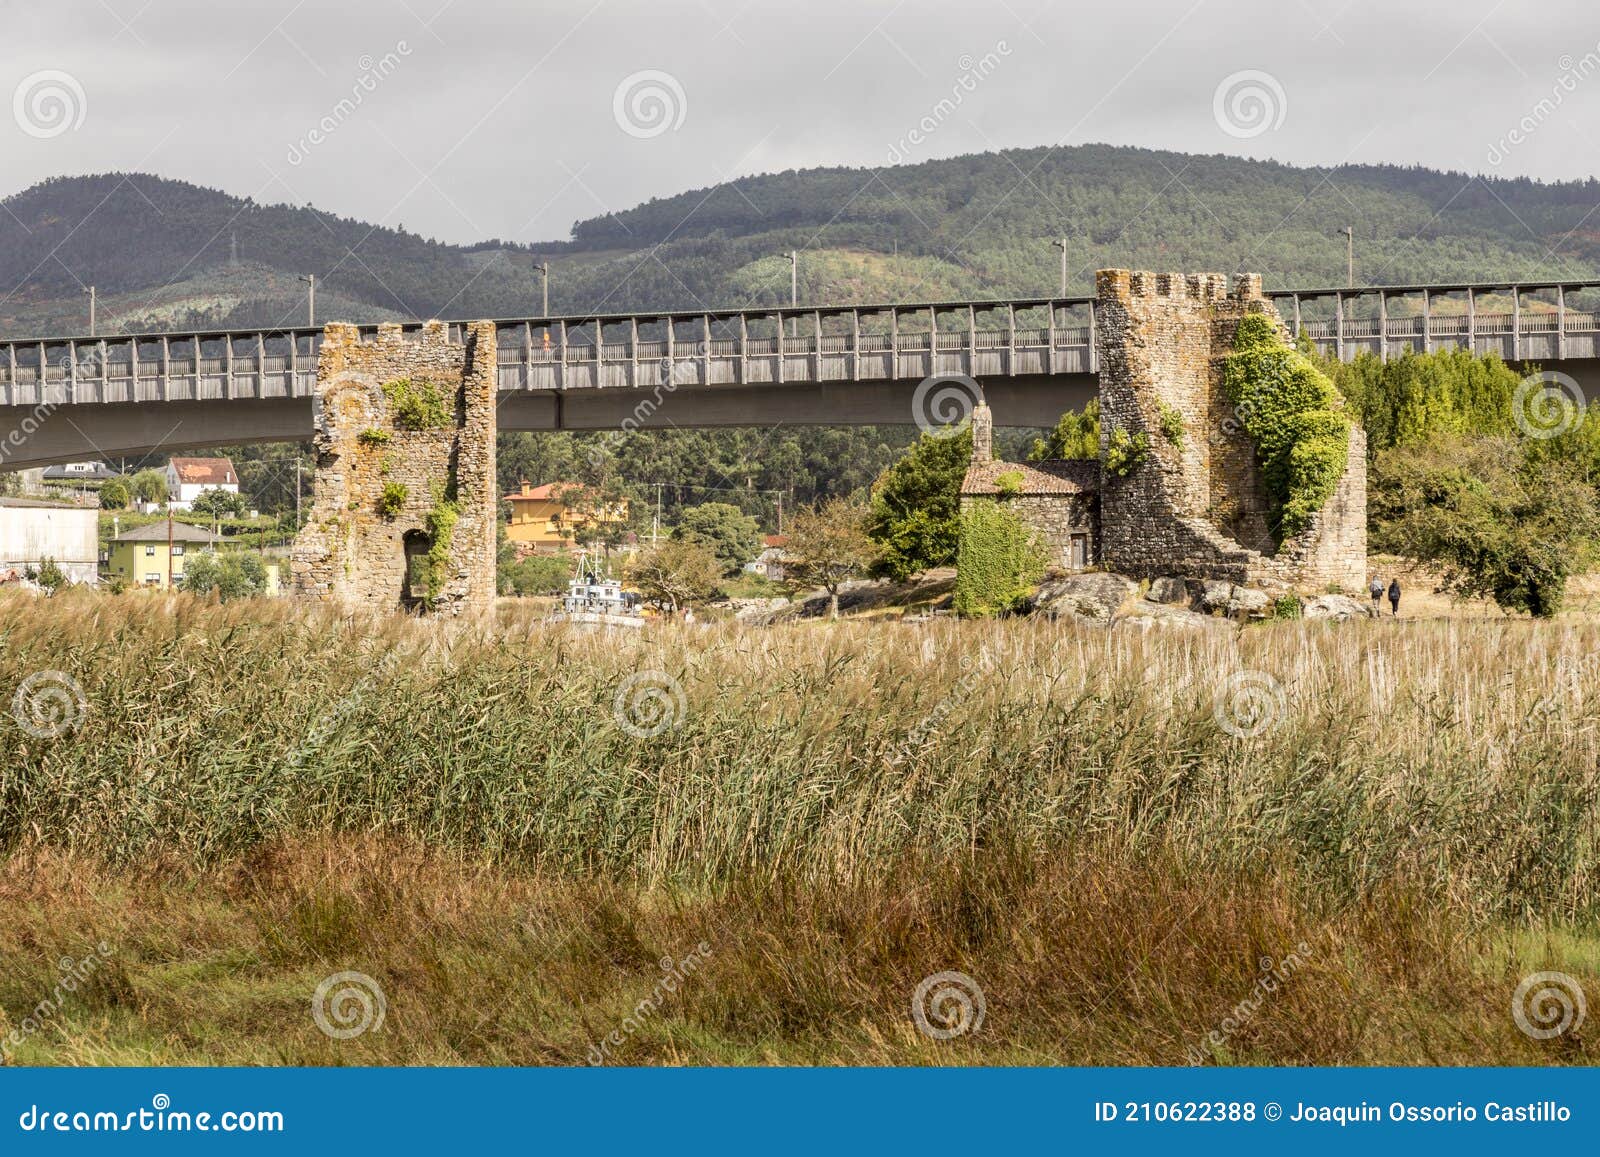 oeste towers in galicia